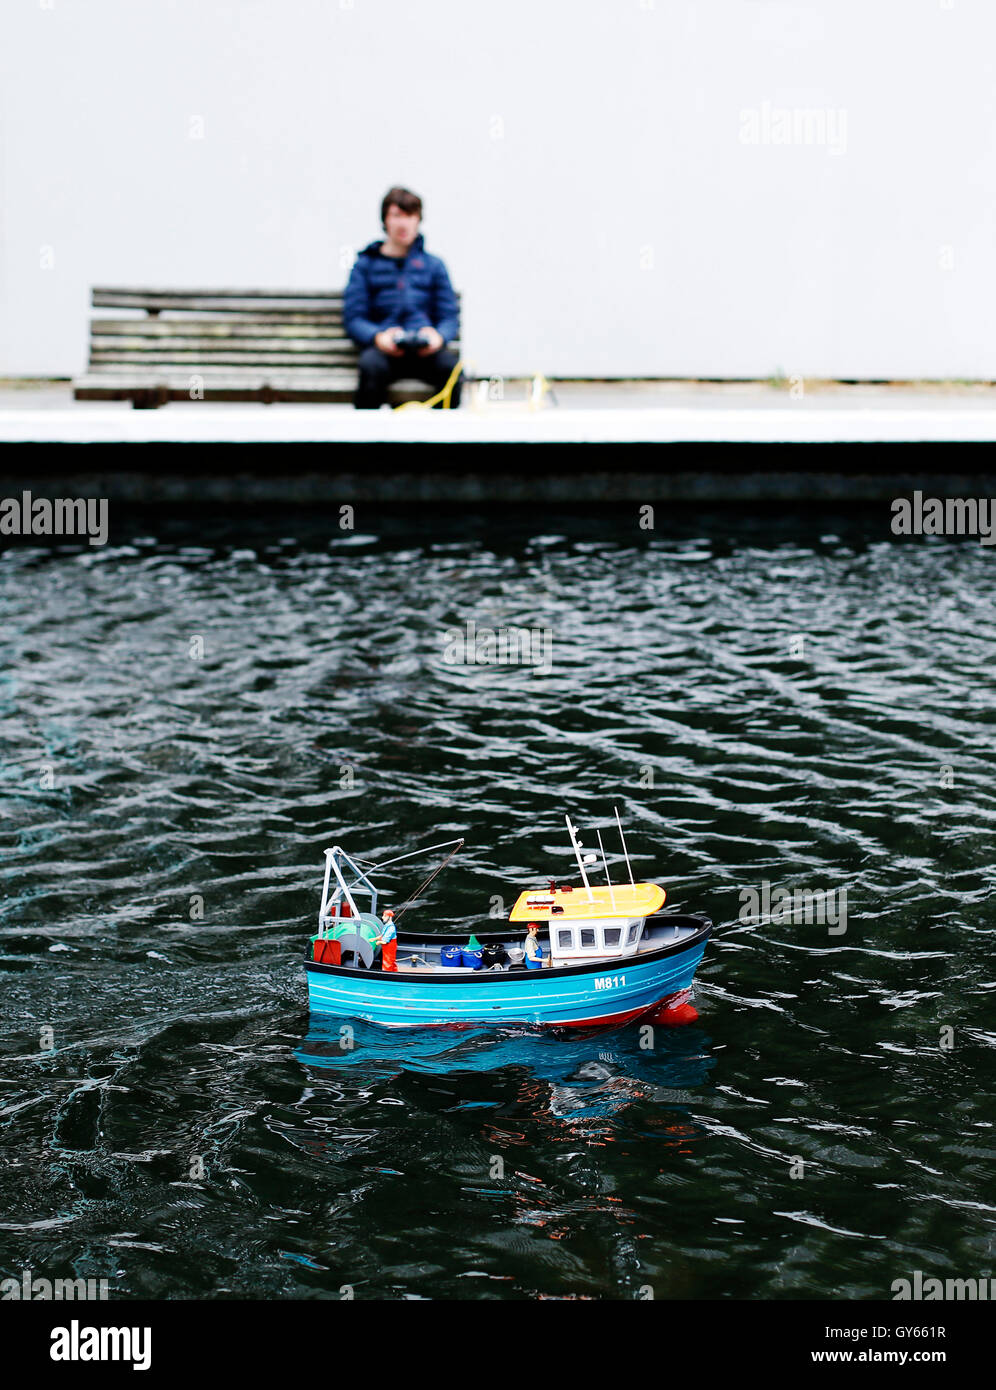 A teenage boy using a remote control boat on a pond.a Stock Photo